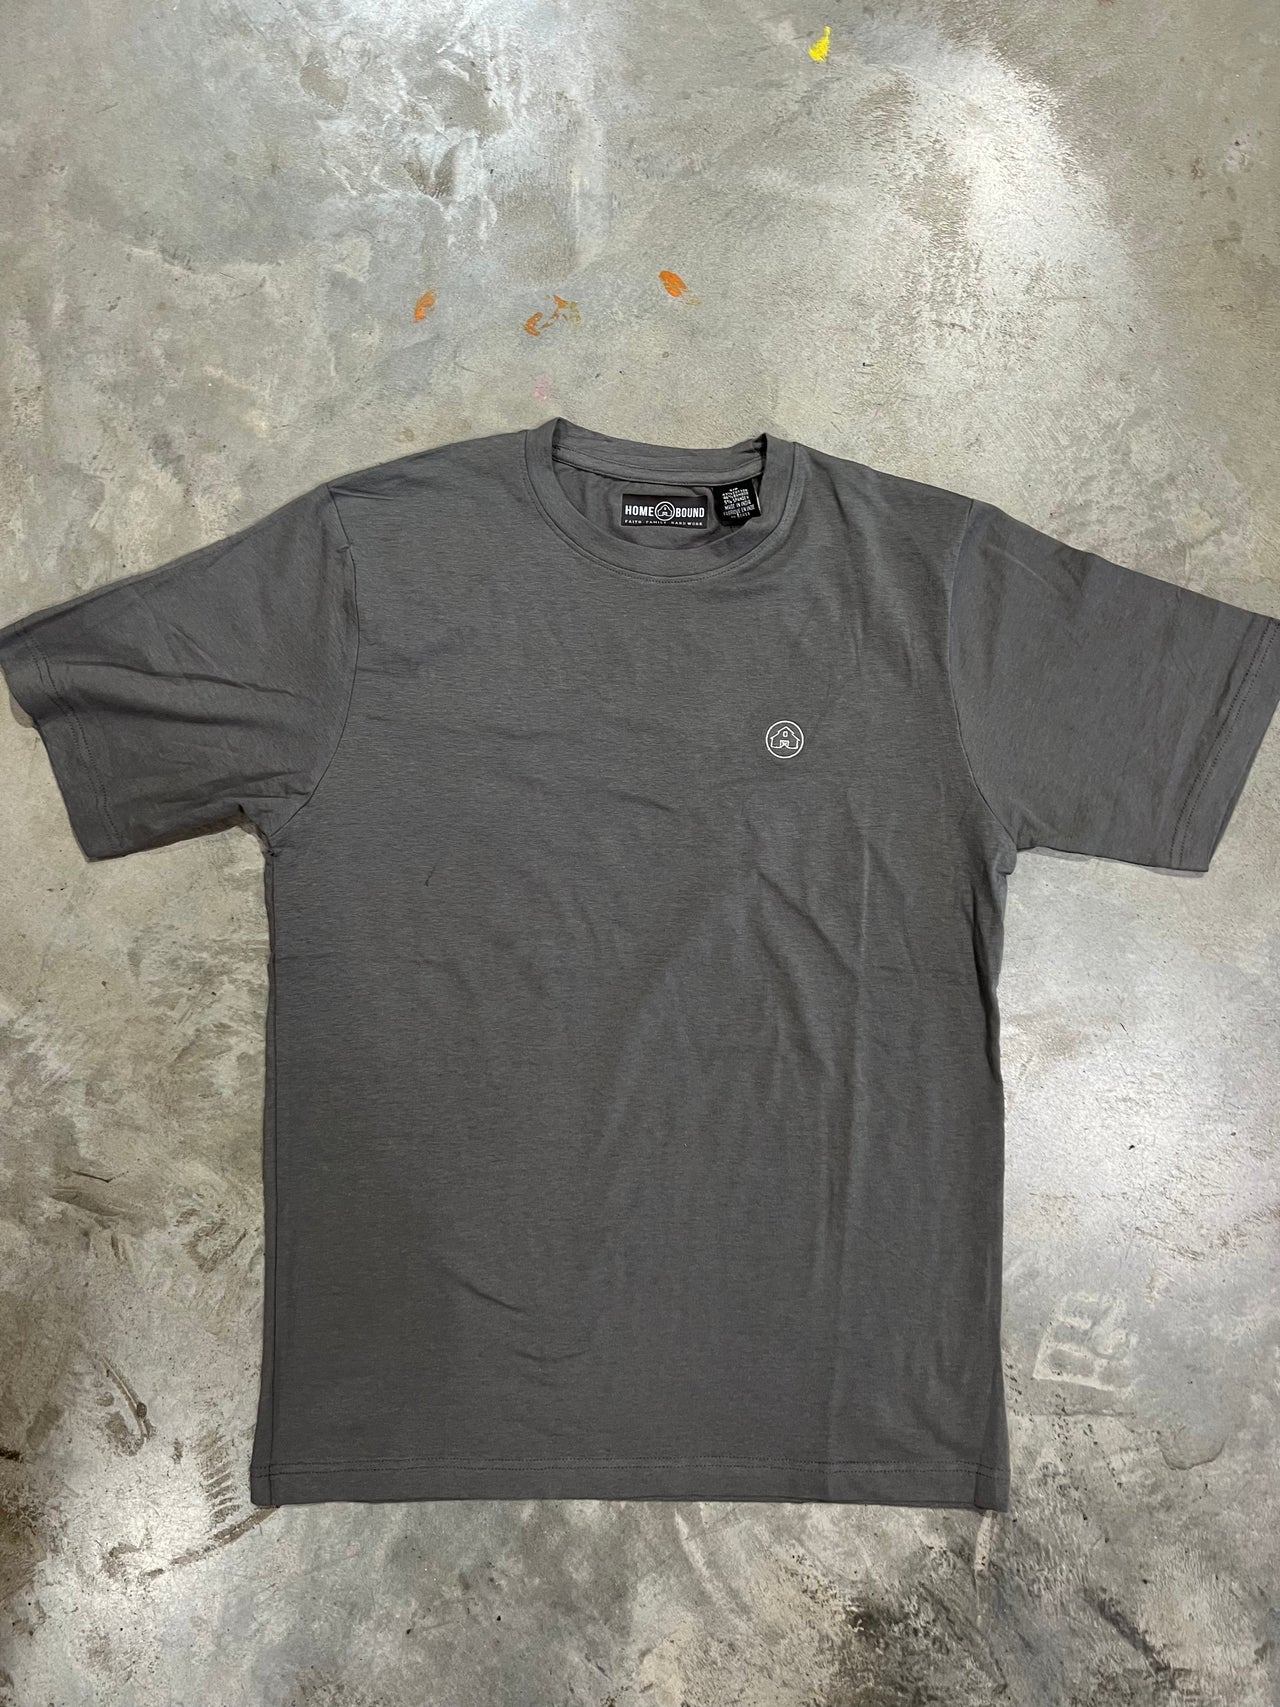 Home Bound Bamboo SS Tee - Charcoal